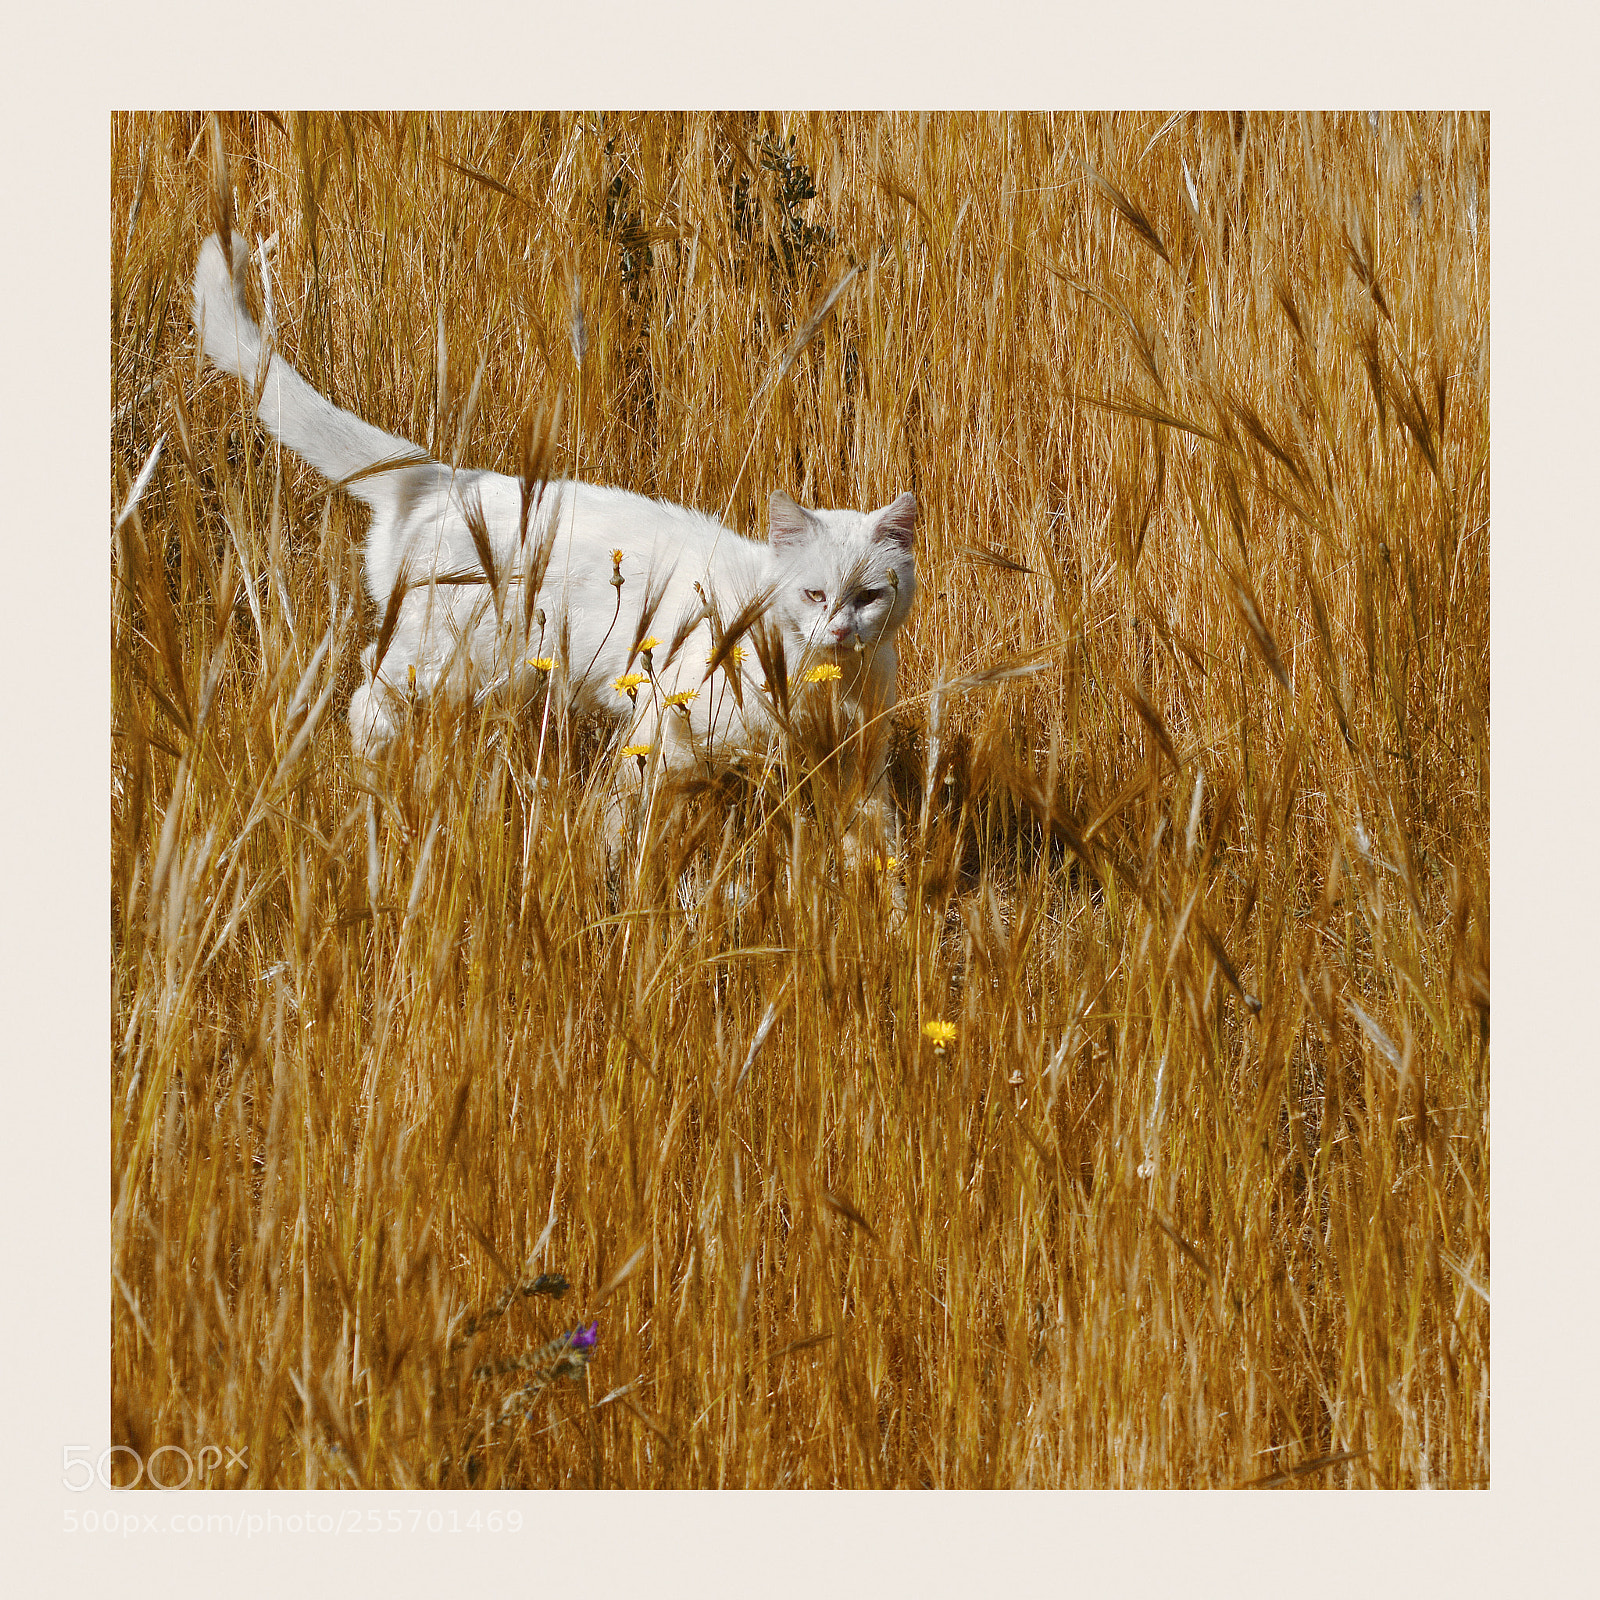 Nikon D800 sample photo. Cat in the wheat photography